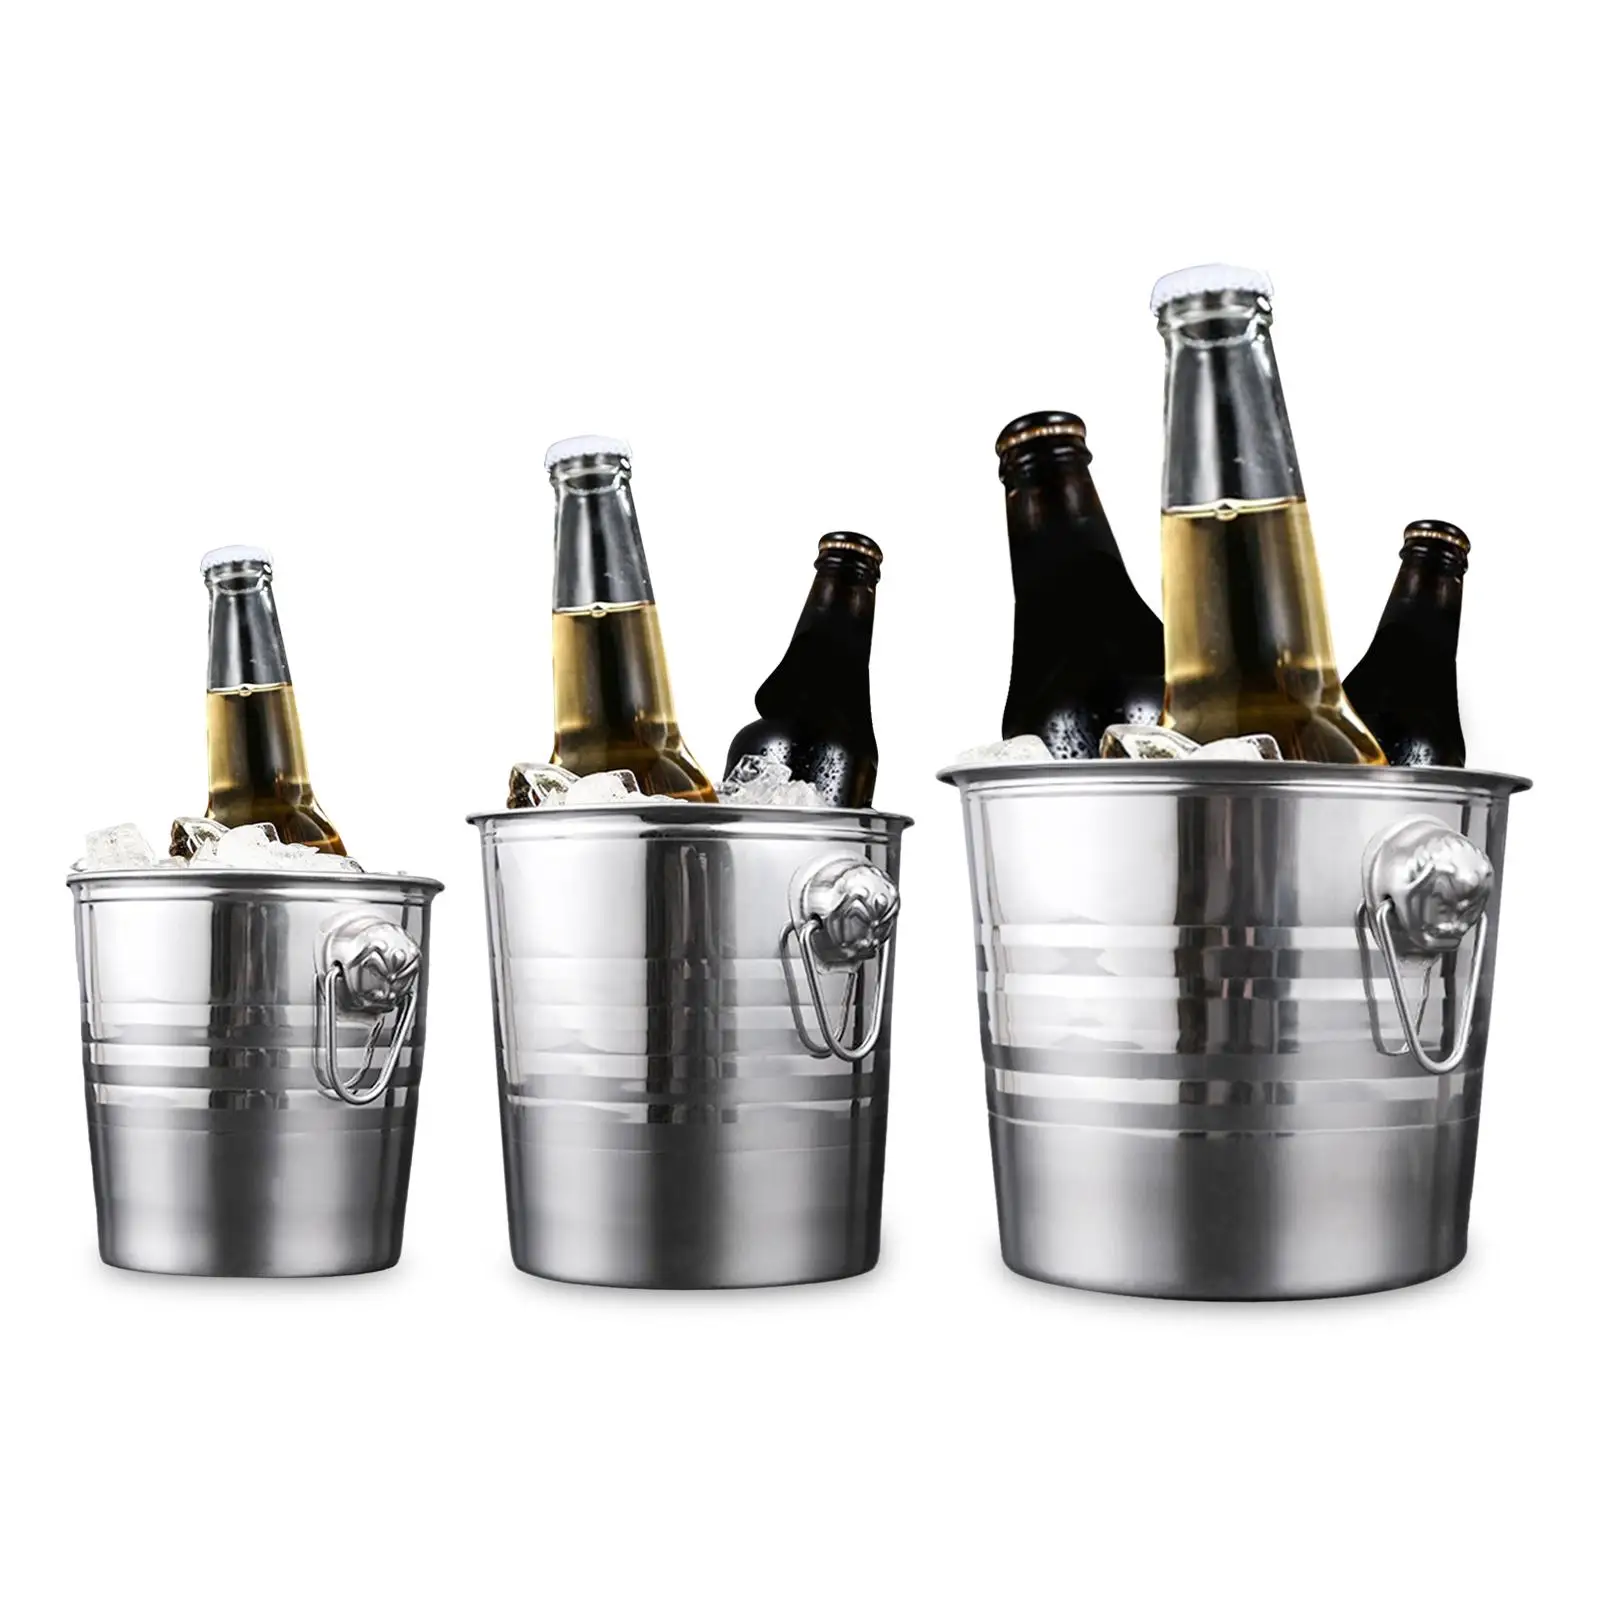 Ice Bucket Drink Tub 3L/5L/7L Double Walled Keeps Ice Cold with Insulation Drink Buckets for Champagne Cocktail Parties Home Bar